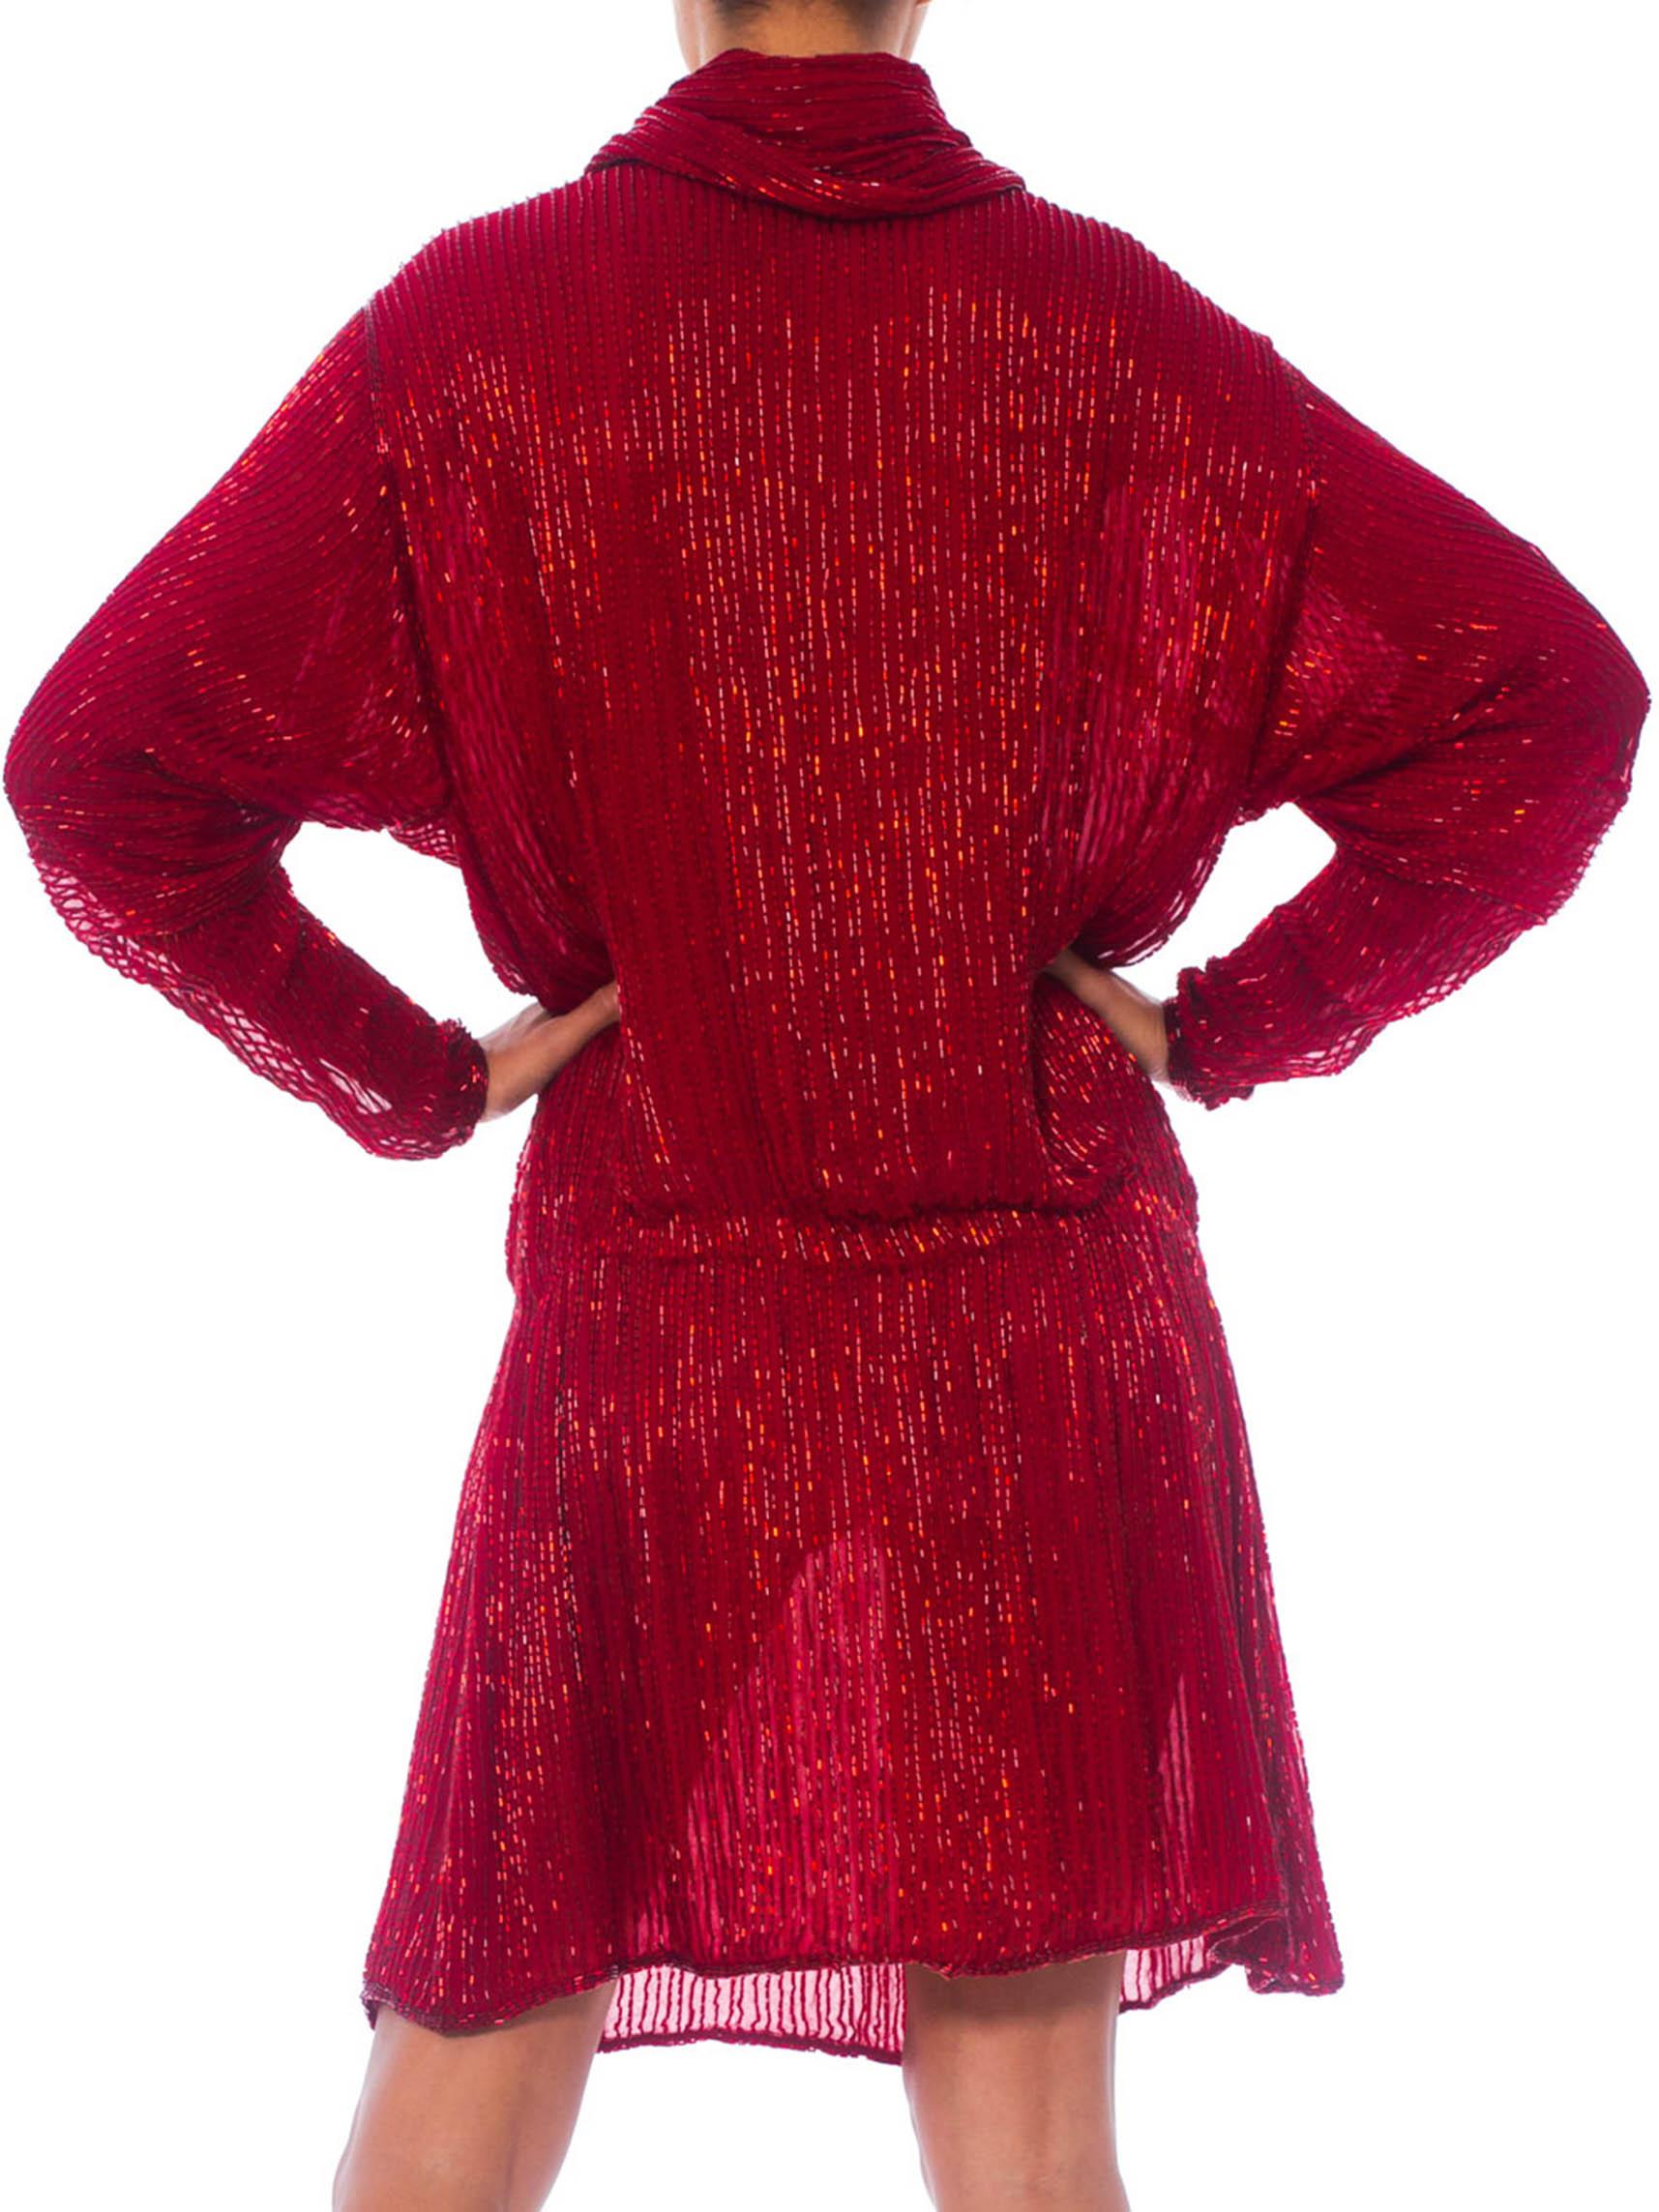 1970S HALSTON Red Silk Chiffon Oversized Mini Cocktail Dress Covered In Bugle B For Sale 1